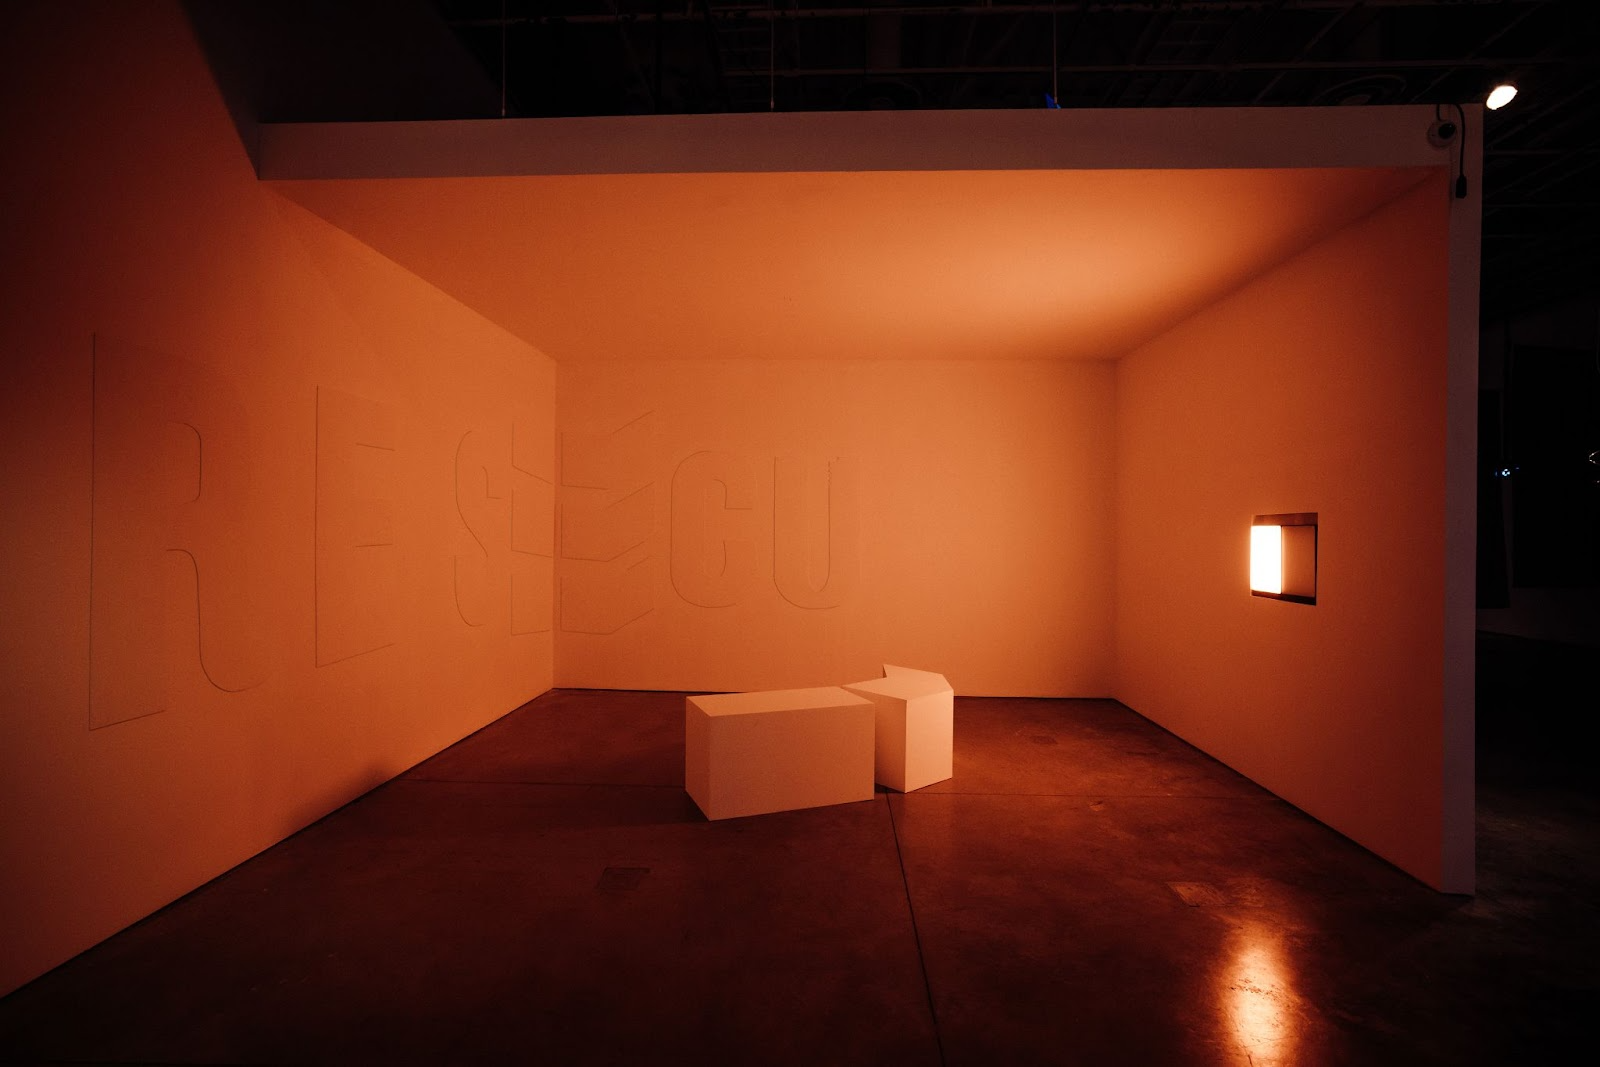 Total Running Time includes multiple works situated clockwise in a warmly lit alcove. Rescue, a plaster wall relief, and two geometric forms are positioned on the gallery floor. A niche on the rightmost wall contains two manipulated light sources, one of which creates a daylight effect.